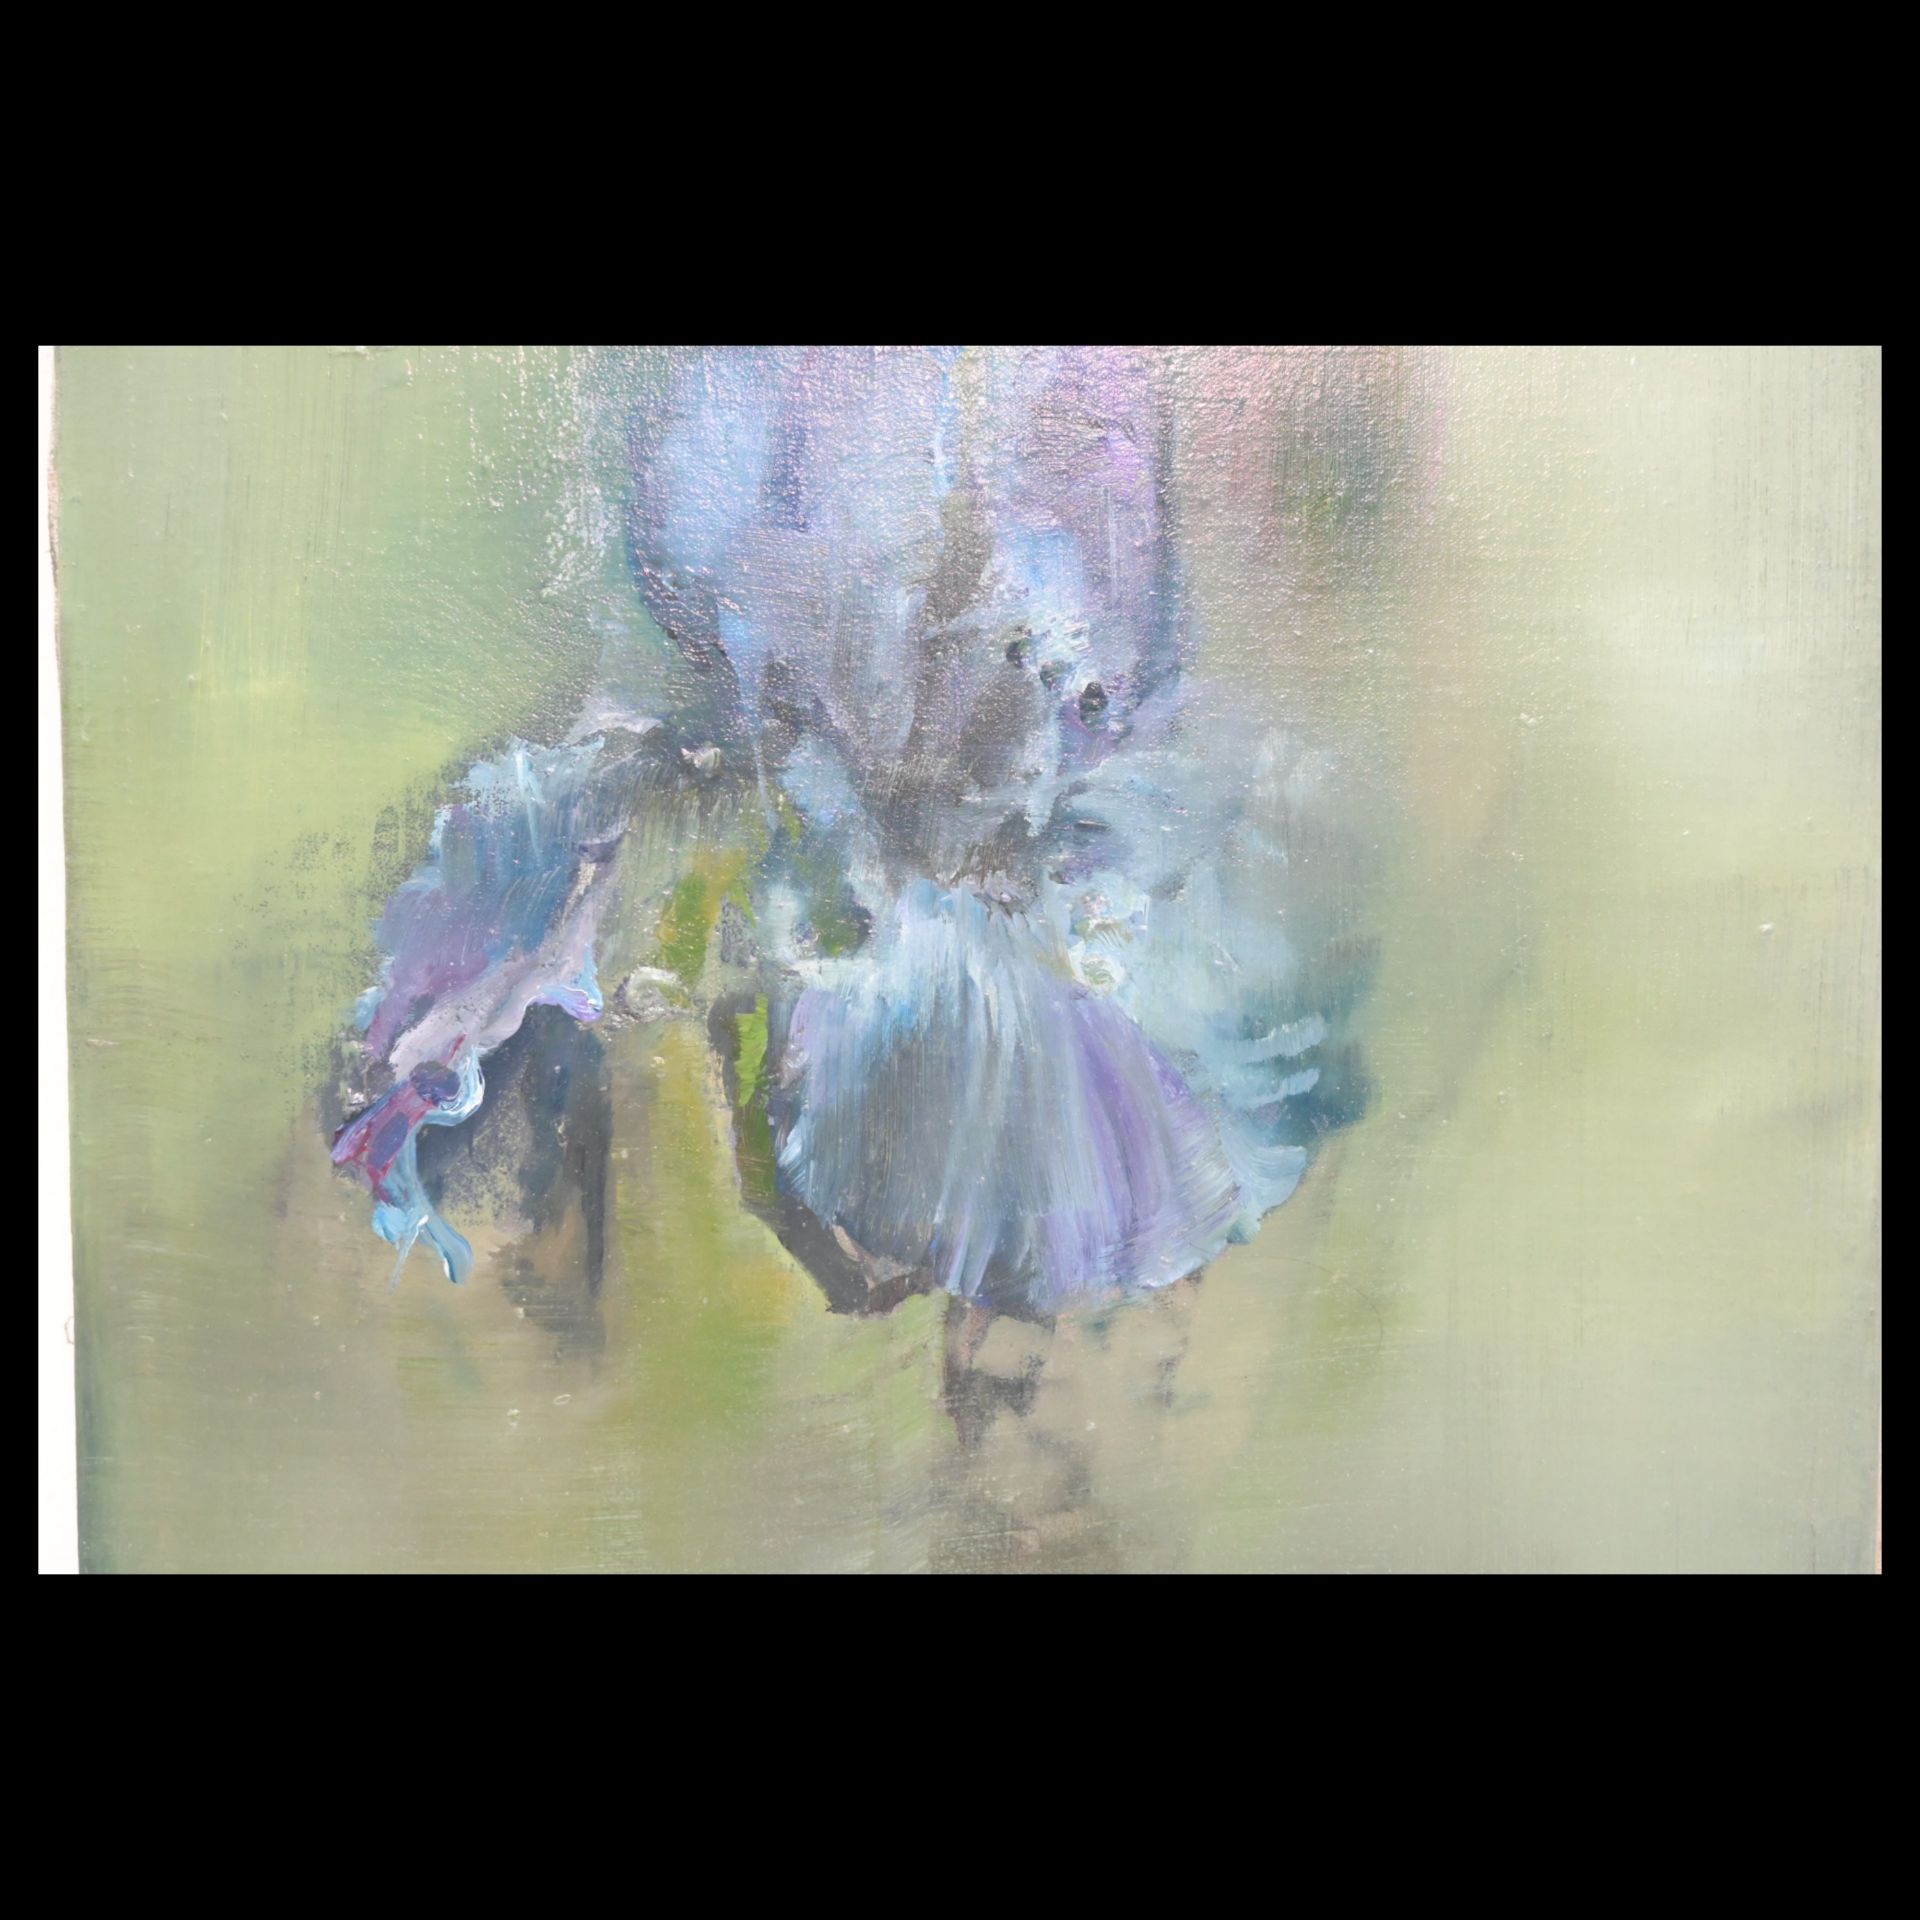 Clement ROSENTHAL (1956) iris flower on green background, oil on canvas, 2002. - Image 3 of 8